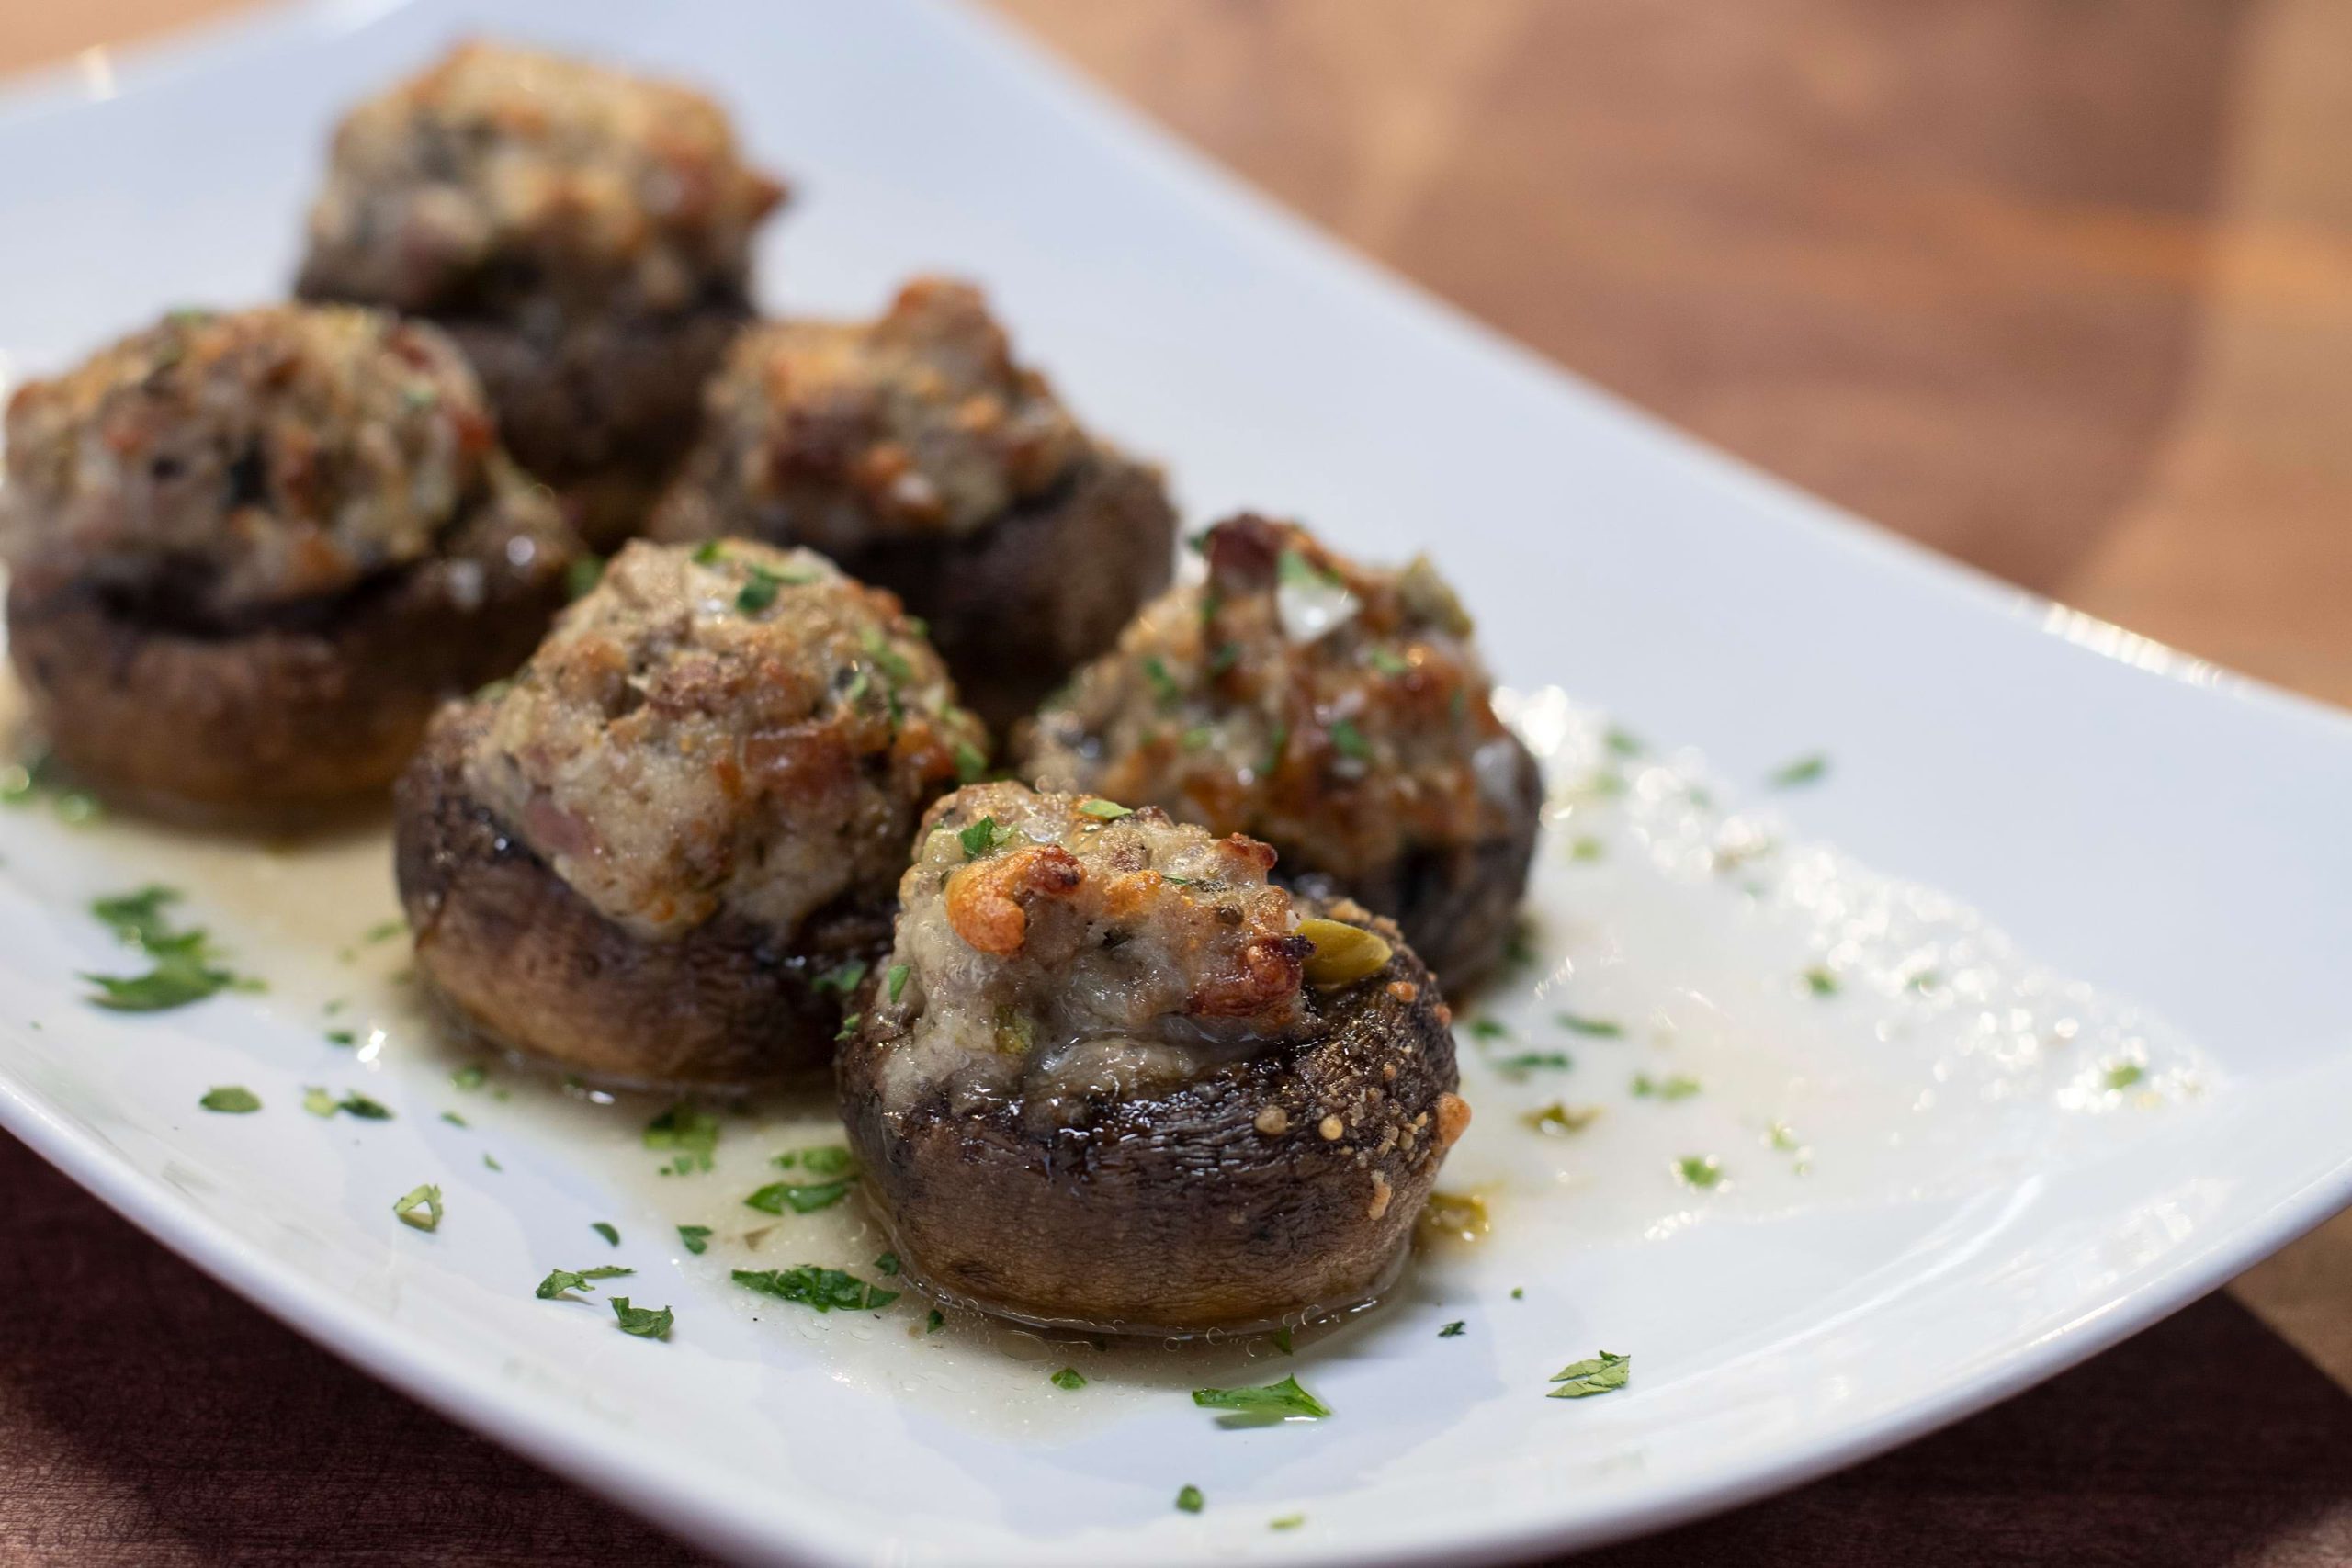 Ground veal mixture stuffed in baby bell mushrooms and cooked to a crispy top, served on a white plated with a light piccata sauce drizzled.